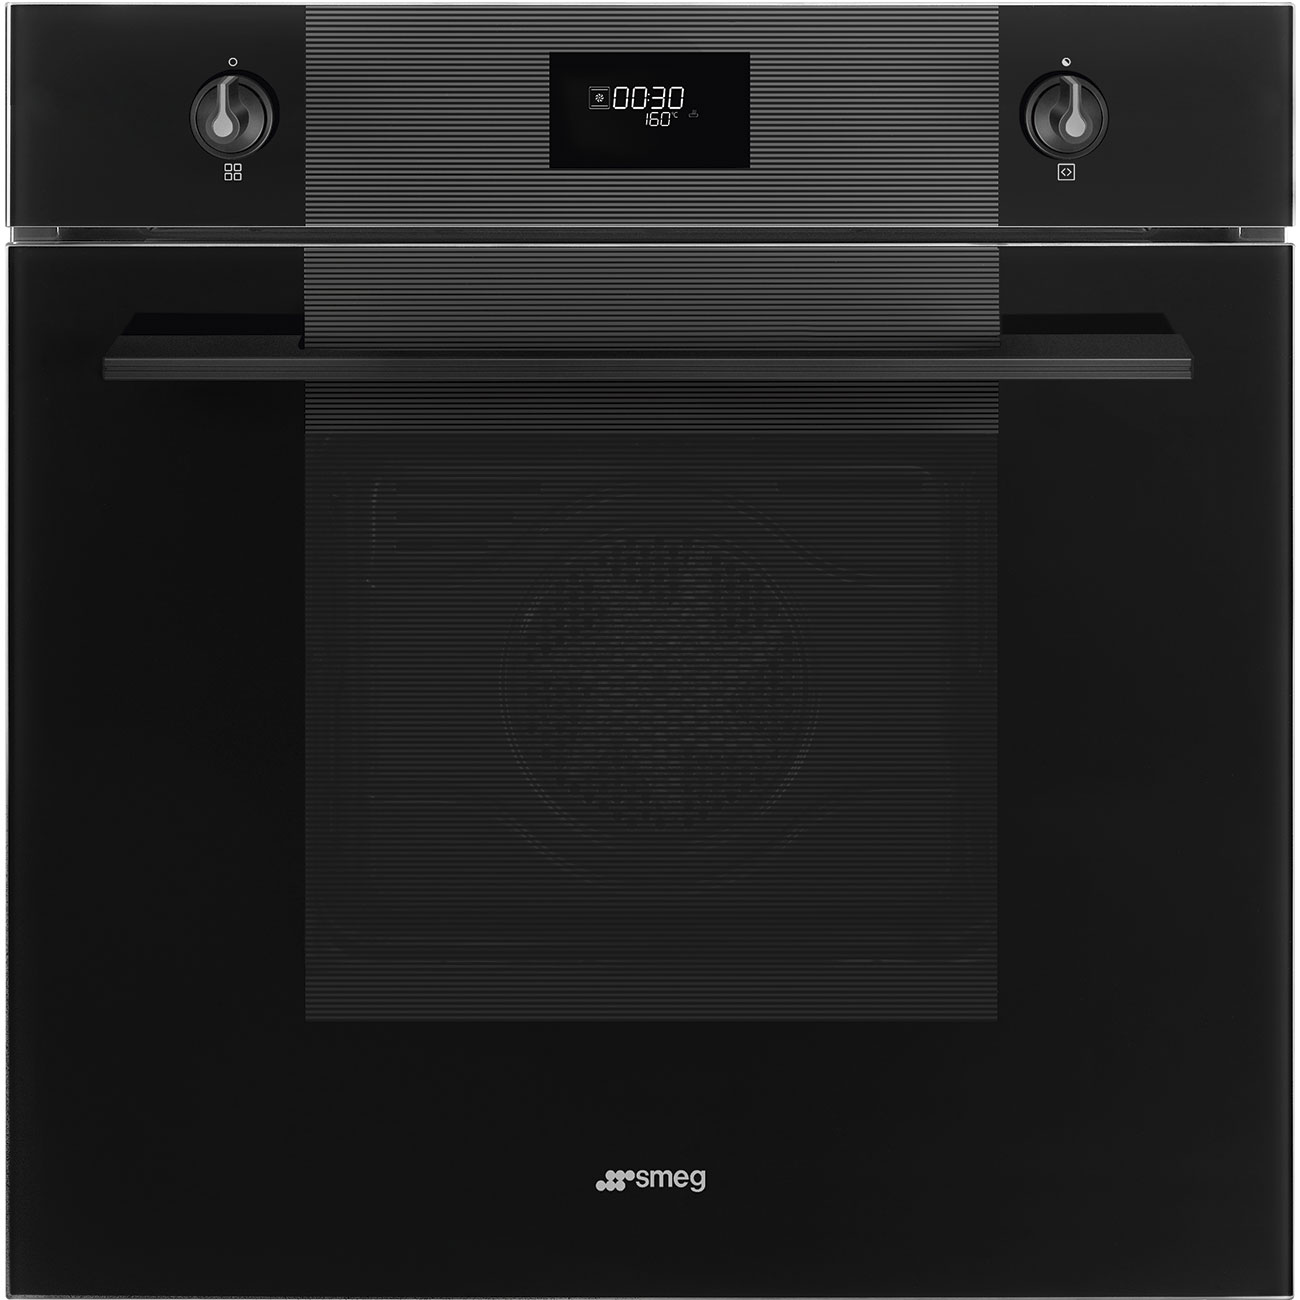 Thermo-ventilated Oven 60cm Smeg_1